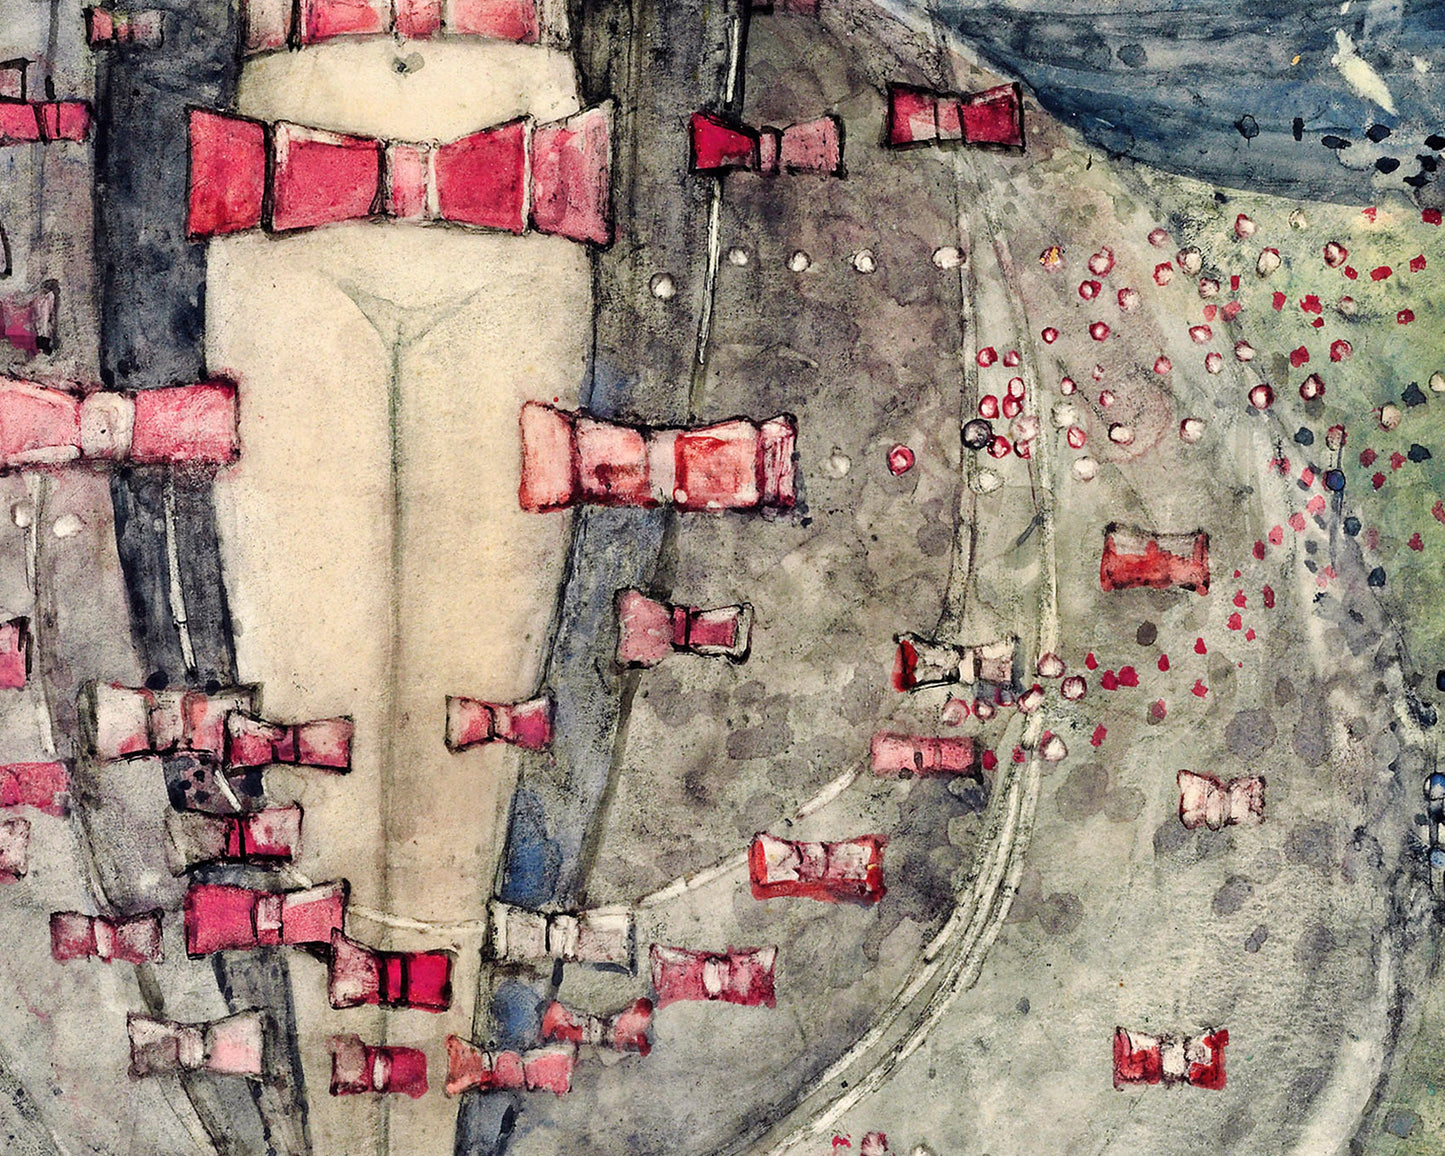 Young woman with red & pink bows | Vintage female nude | Art nouveau wall art | Frances Macdonald MacNair | Female artist